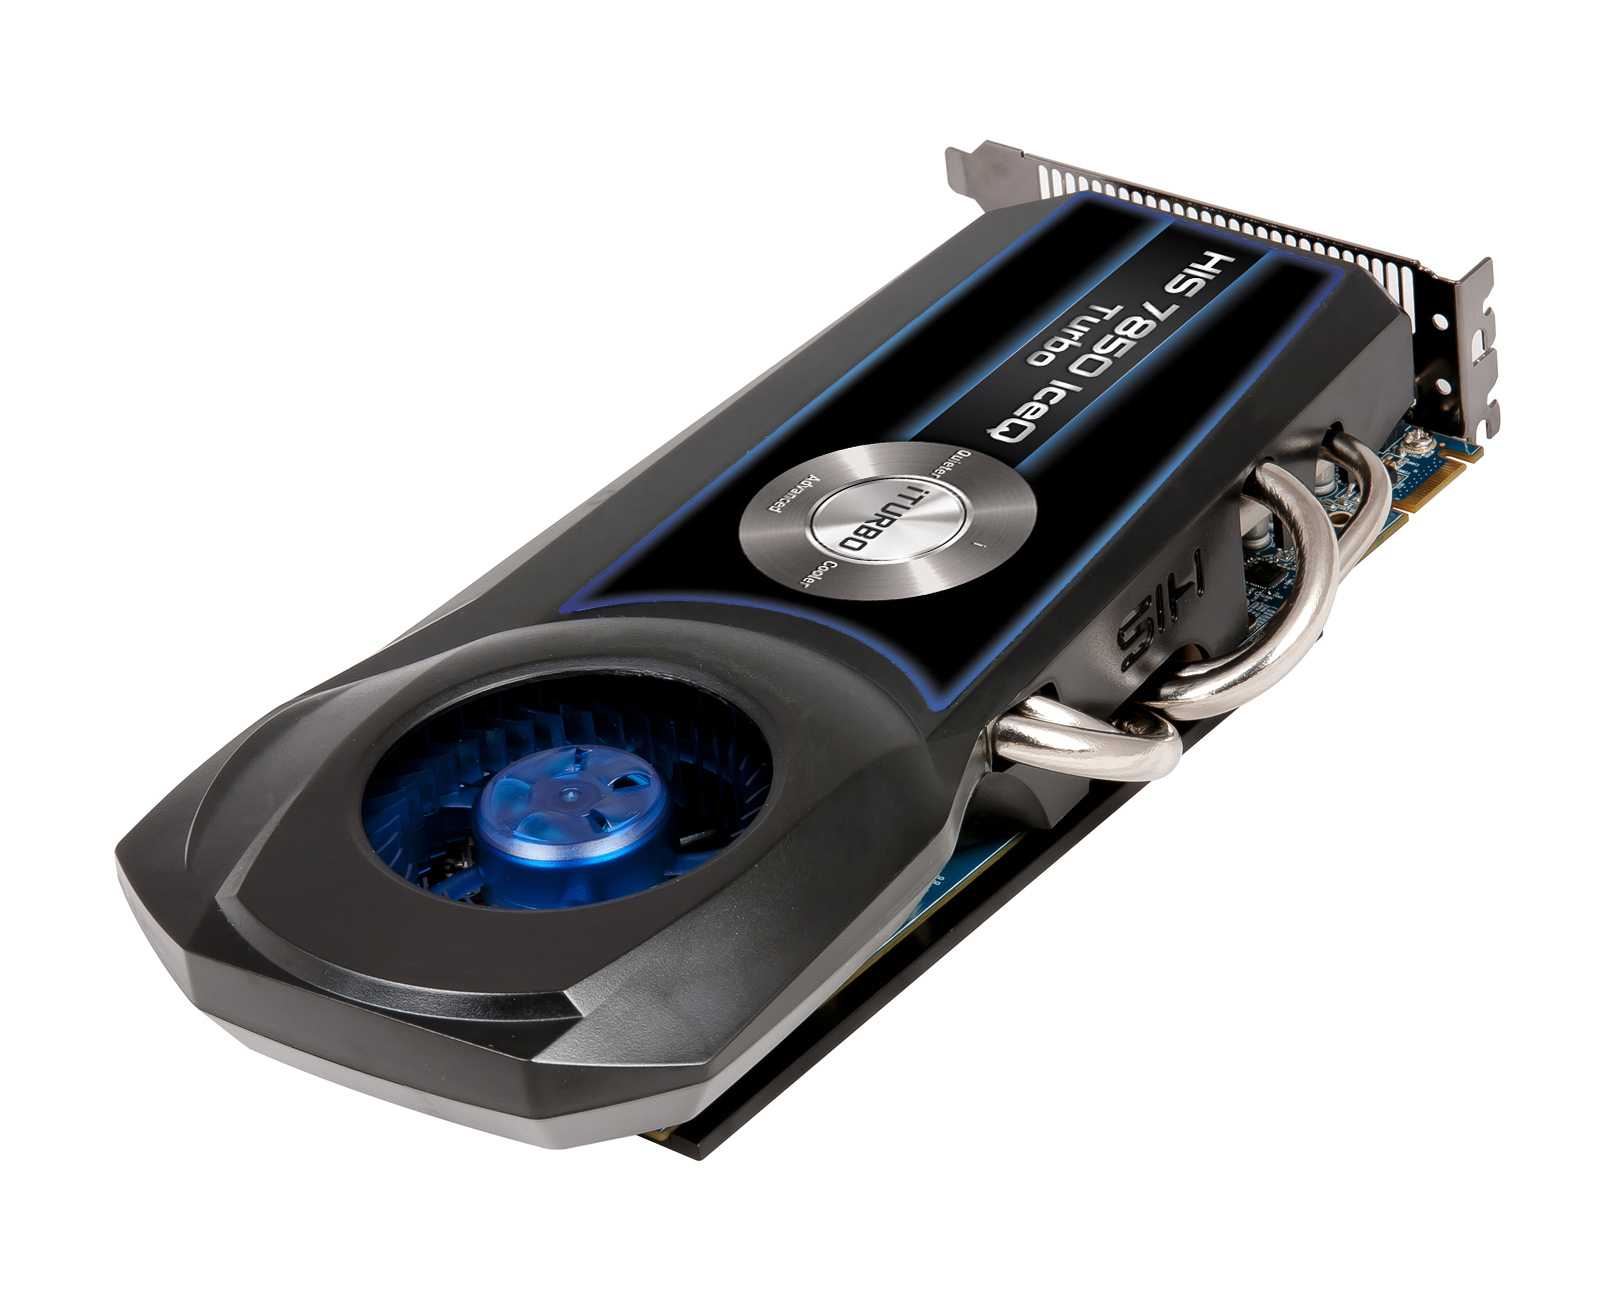 HIS HD 7850 iPower IceQ Turbo 4GB GPU Review with Crossfire - Overclockers